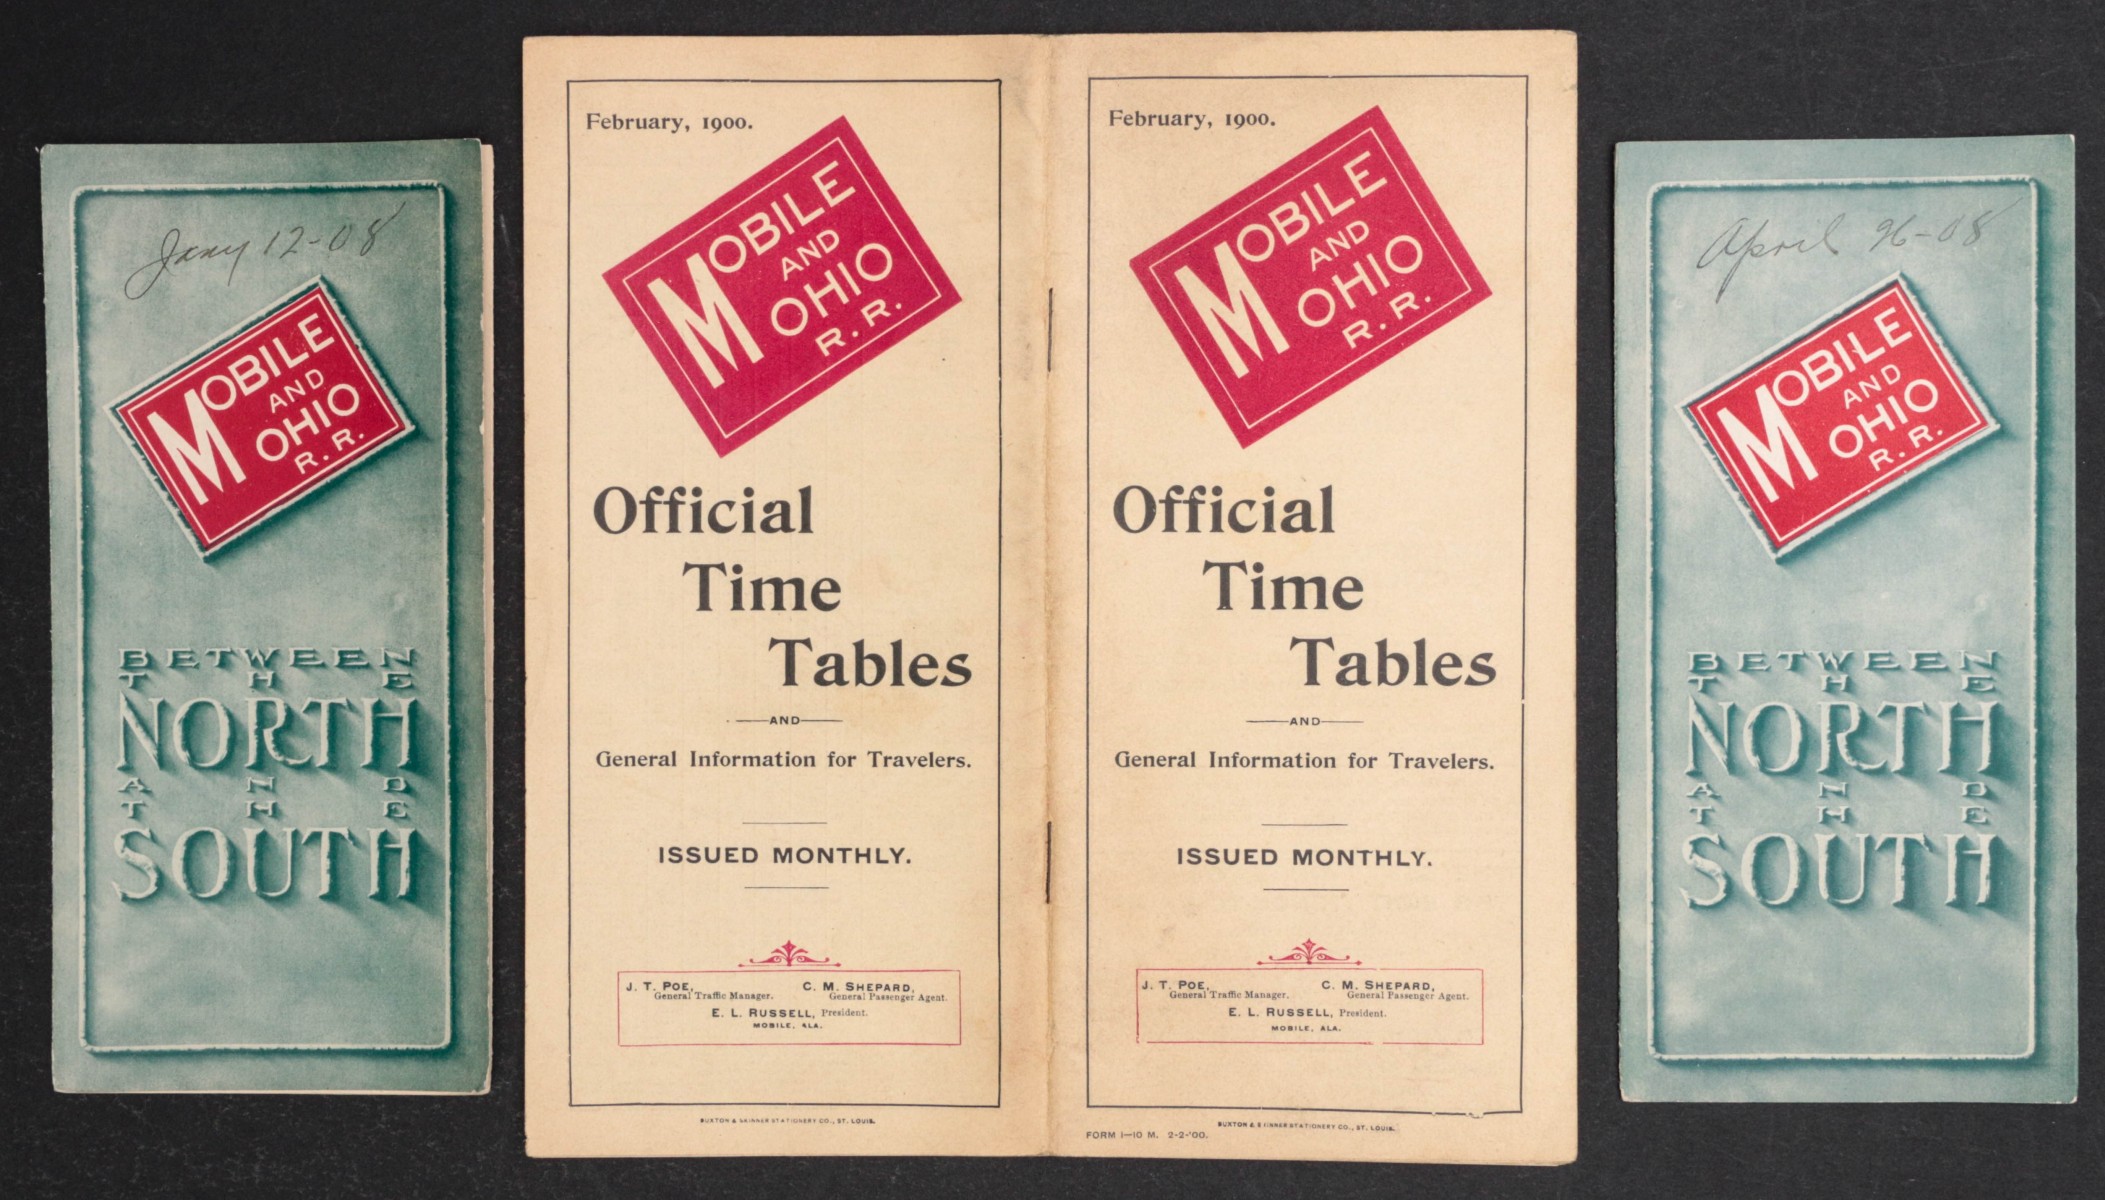 MOBILE & OHIO R.R. TIMETABLES FOR 1900, 1908 & 1908